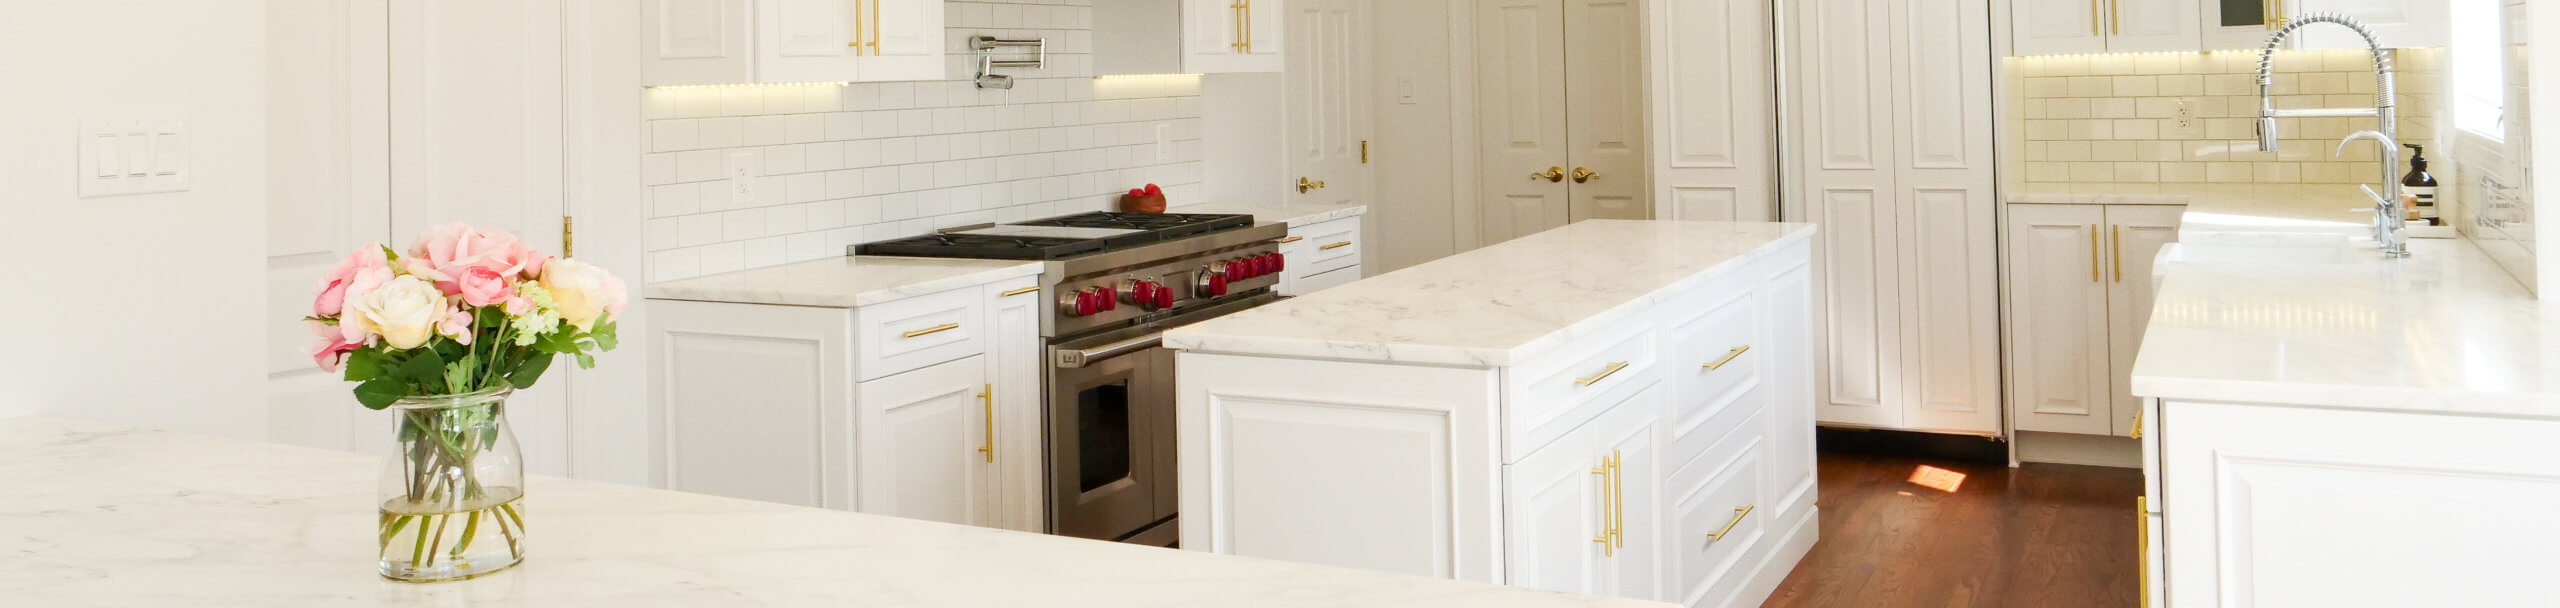 Marble white counters in newly remodeled kitchen